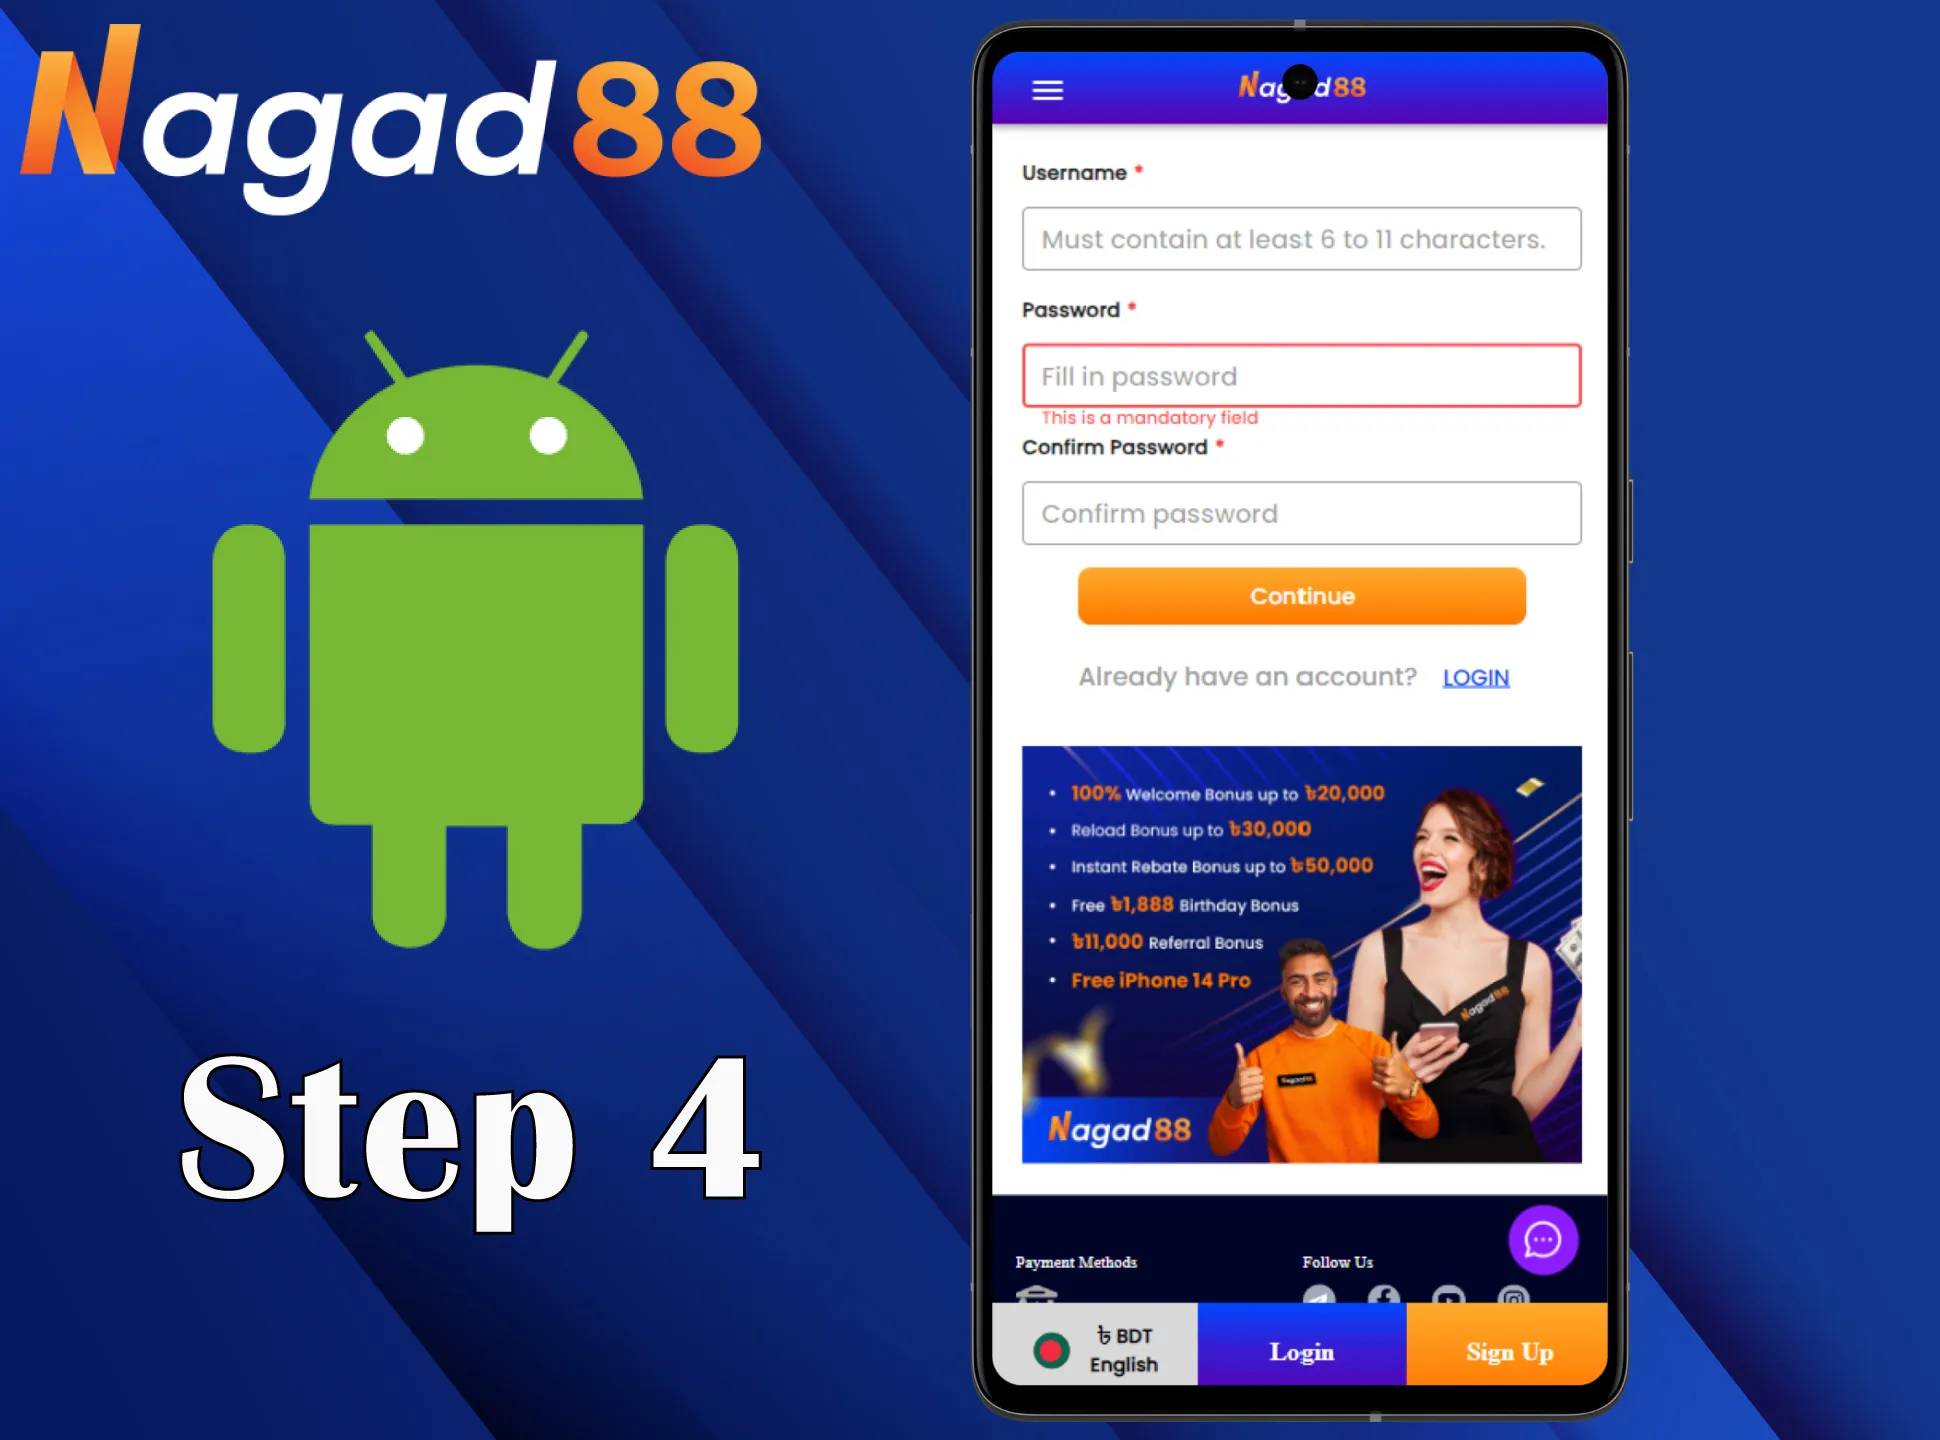 Sign up for Nagad88 and start betting.